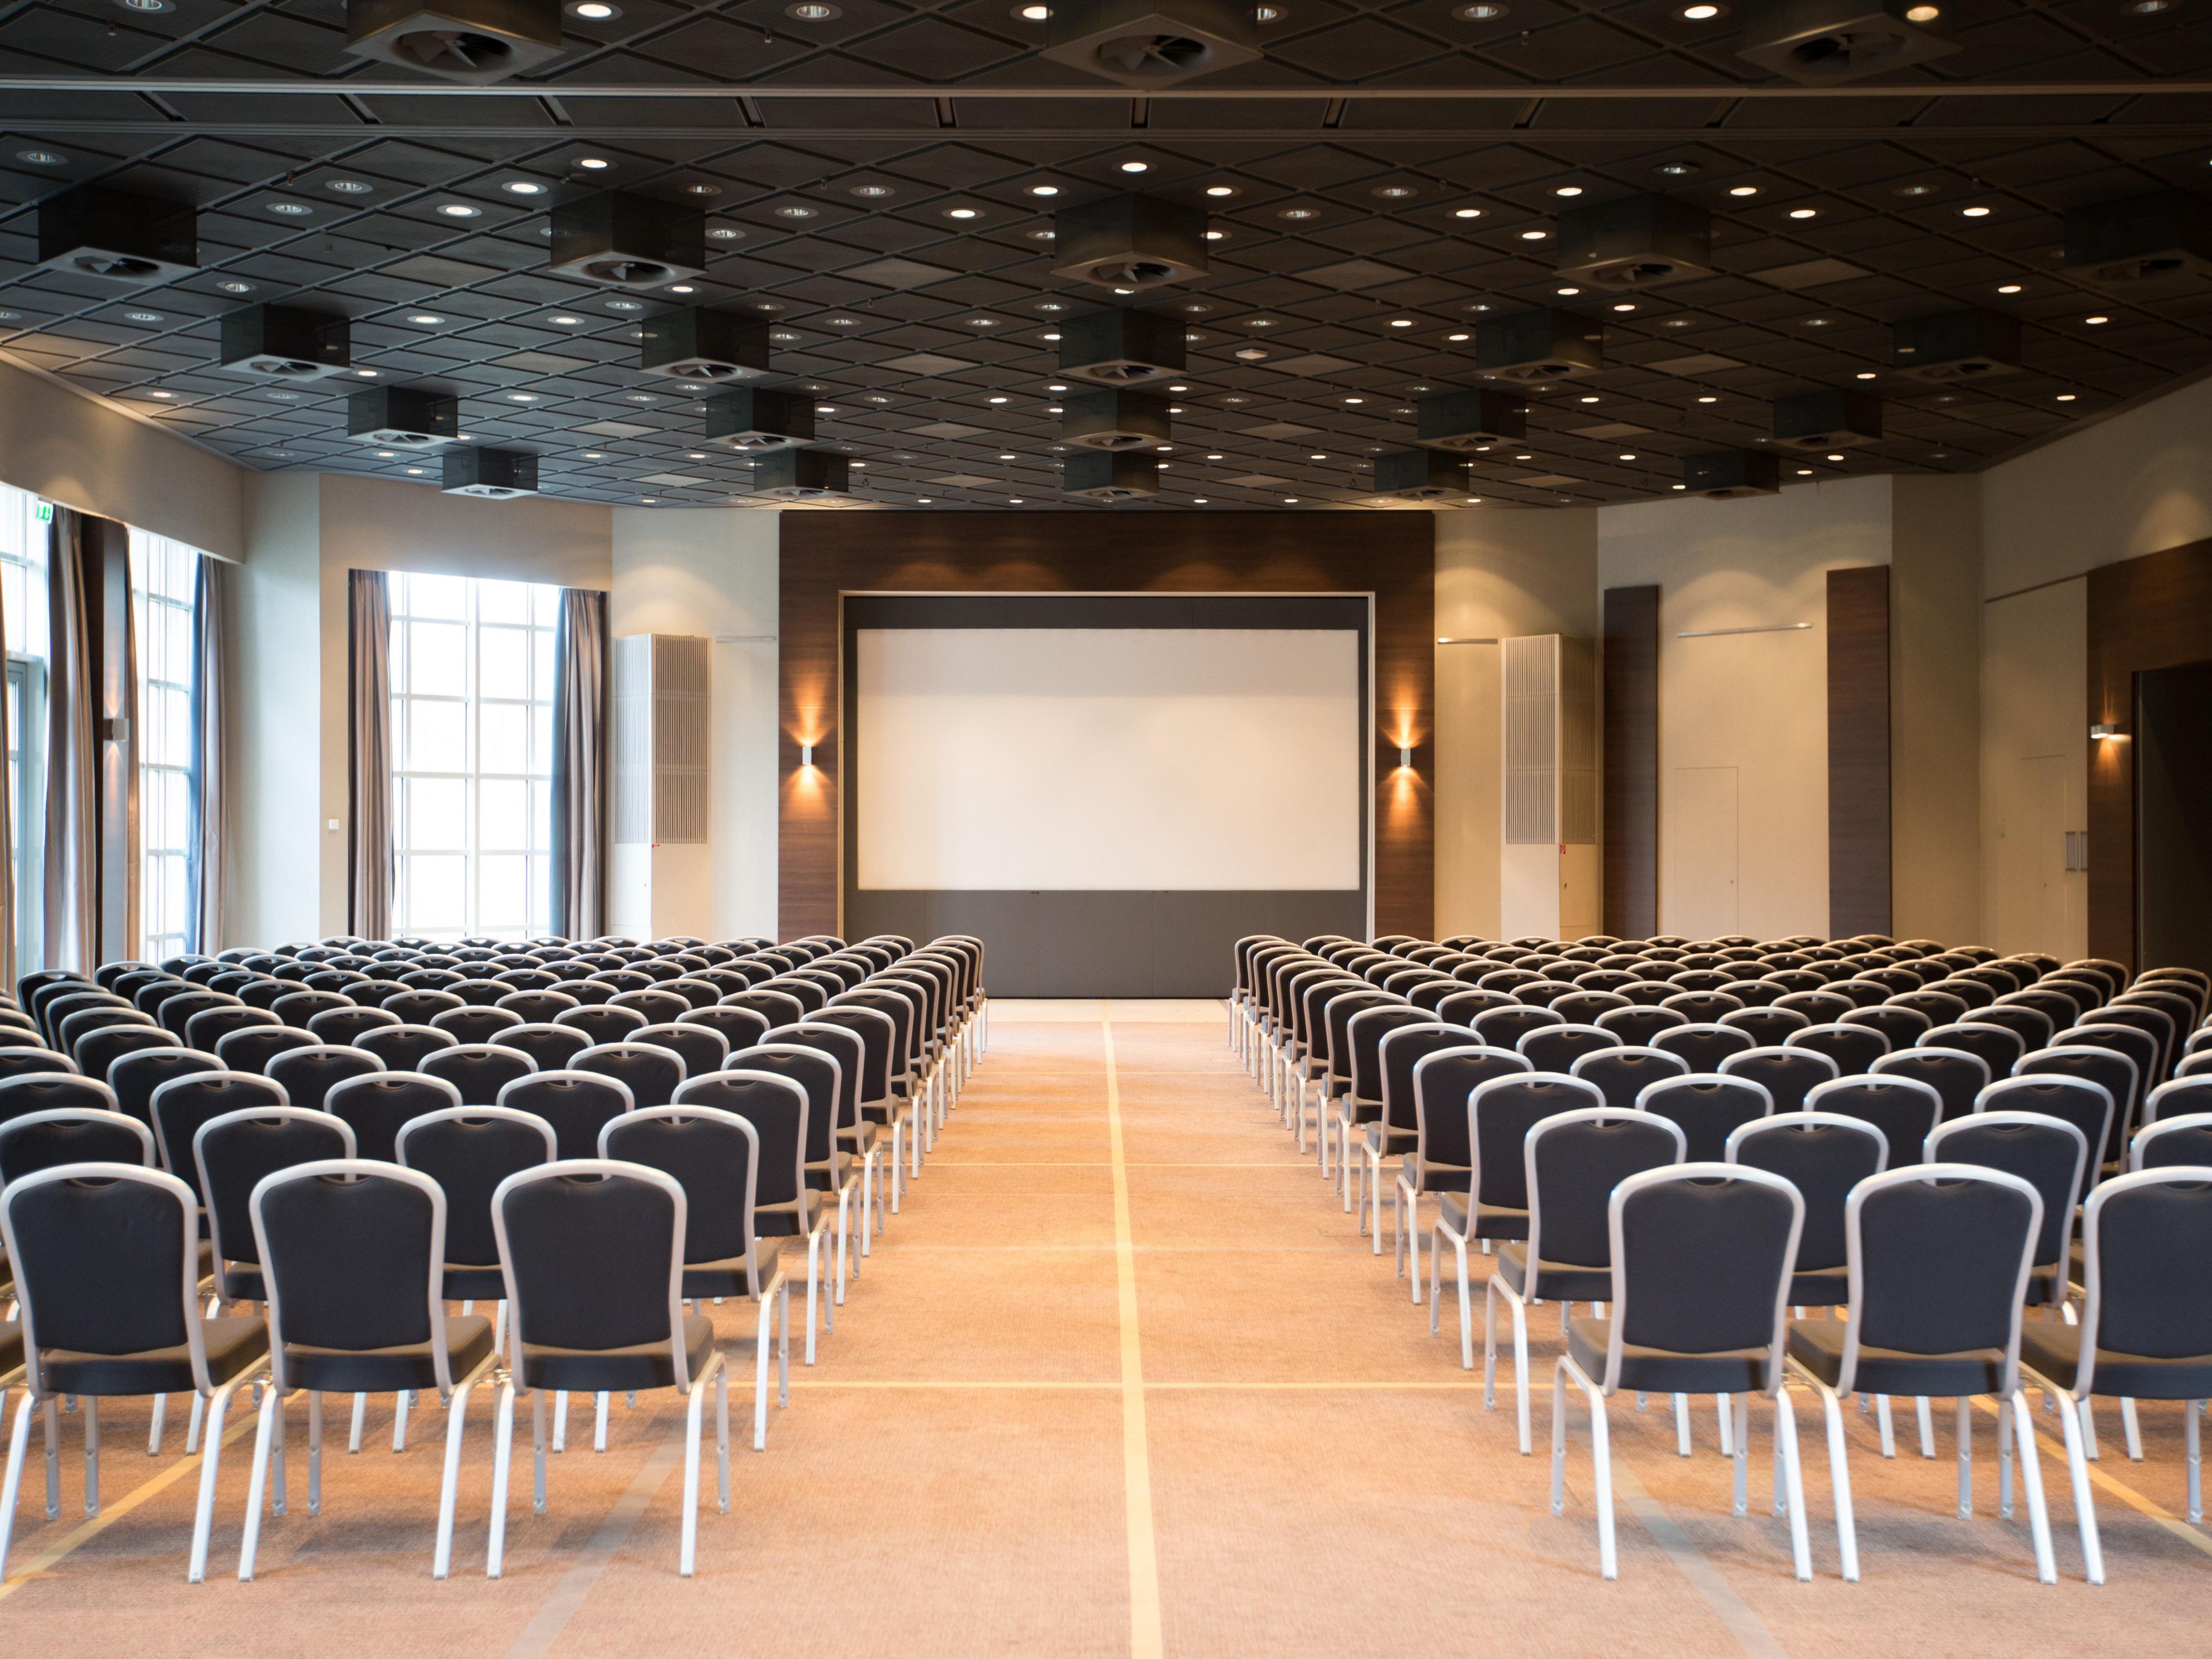 You are in charge of planning meetings and events? We are the third largest conference hotel within greater Frankfurt, offering a daylight ballroom for up to 500 people as well as various break out rooms. Don't hesitate getting in touch with us for your next event!